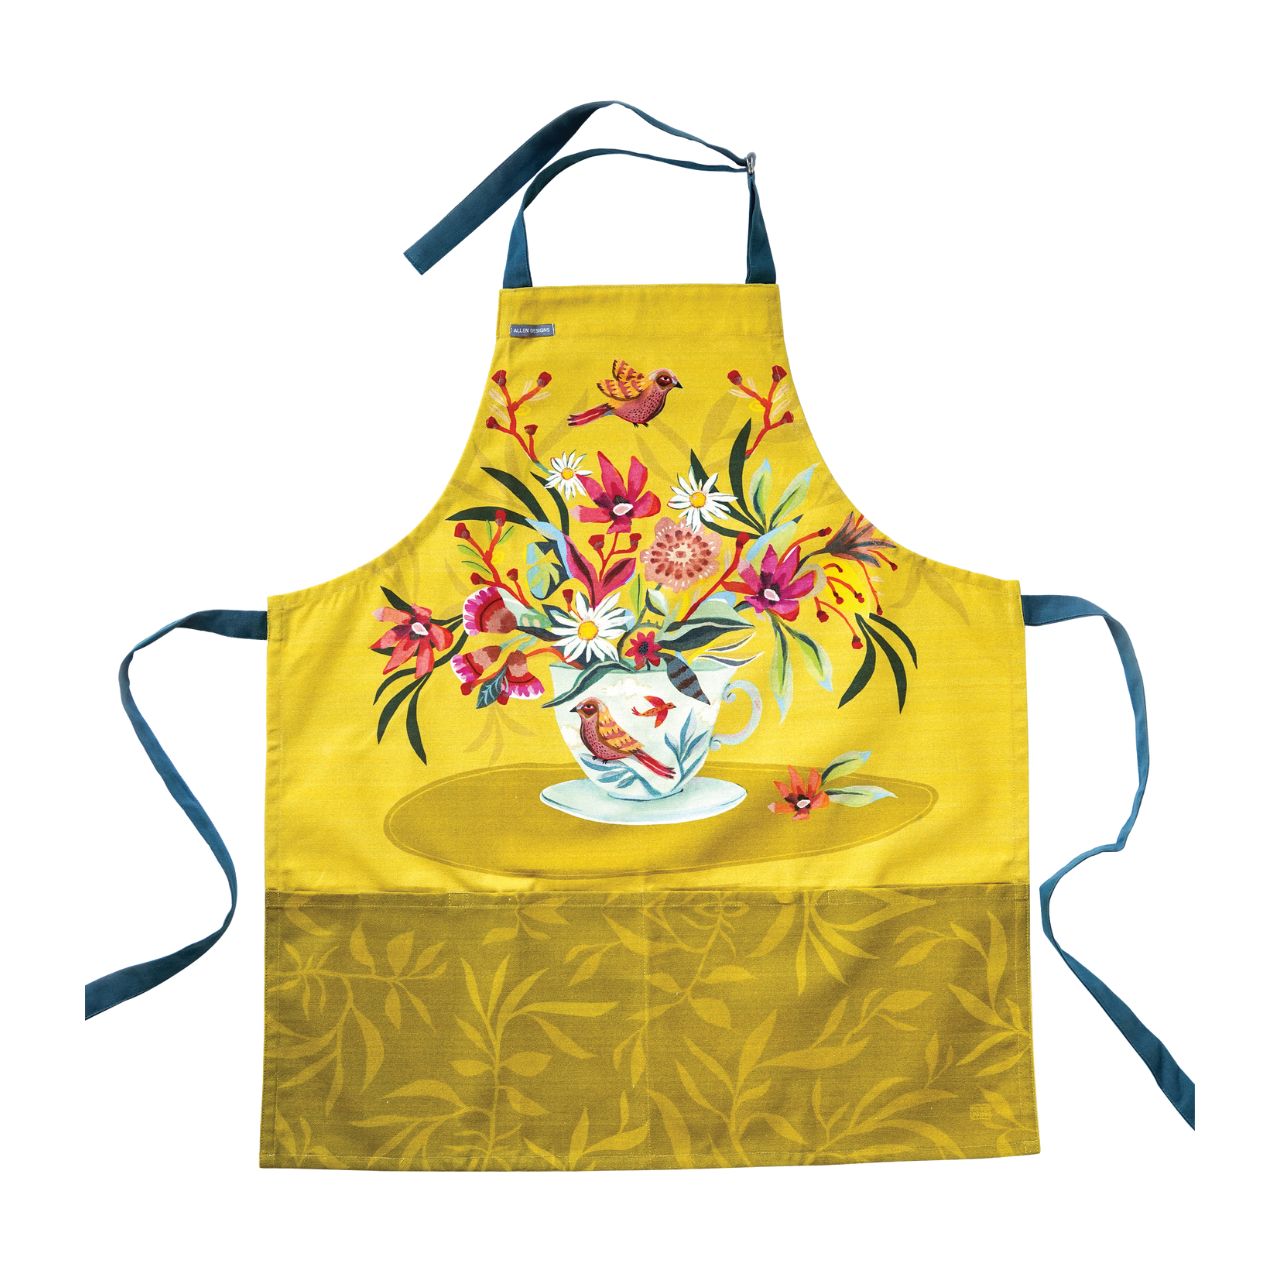 Cup of Tea Apron by Allen Design  Our Cup of Tea adjustable apron is made from 100% cotton and sturdy, canvas material. The fabric is certainly durable, yet flexible enough for every day comfort. The fully adjustable neck strap makes these adult-sized aprons are perfect for anyone.